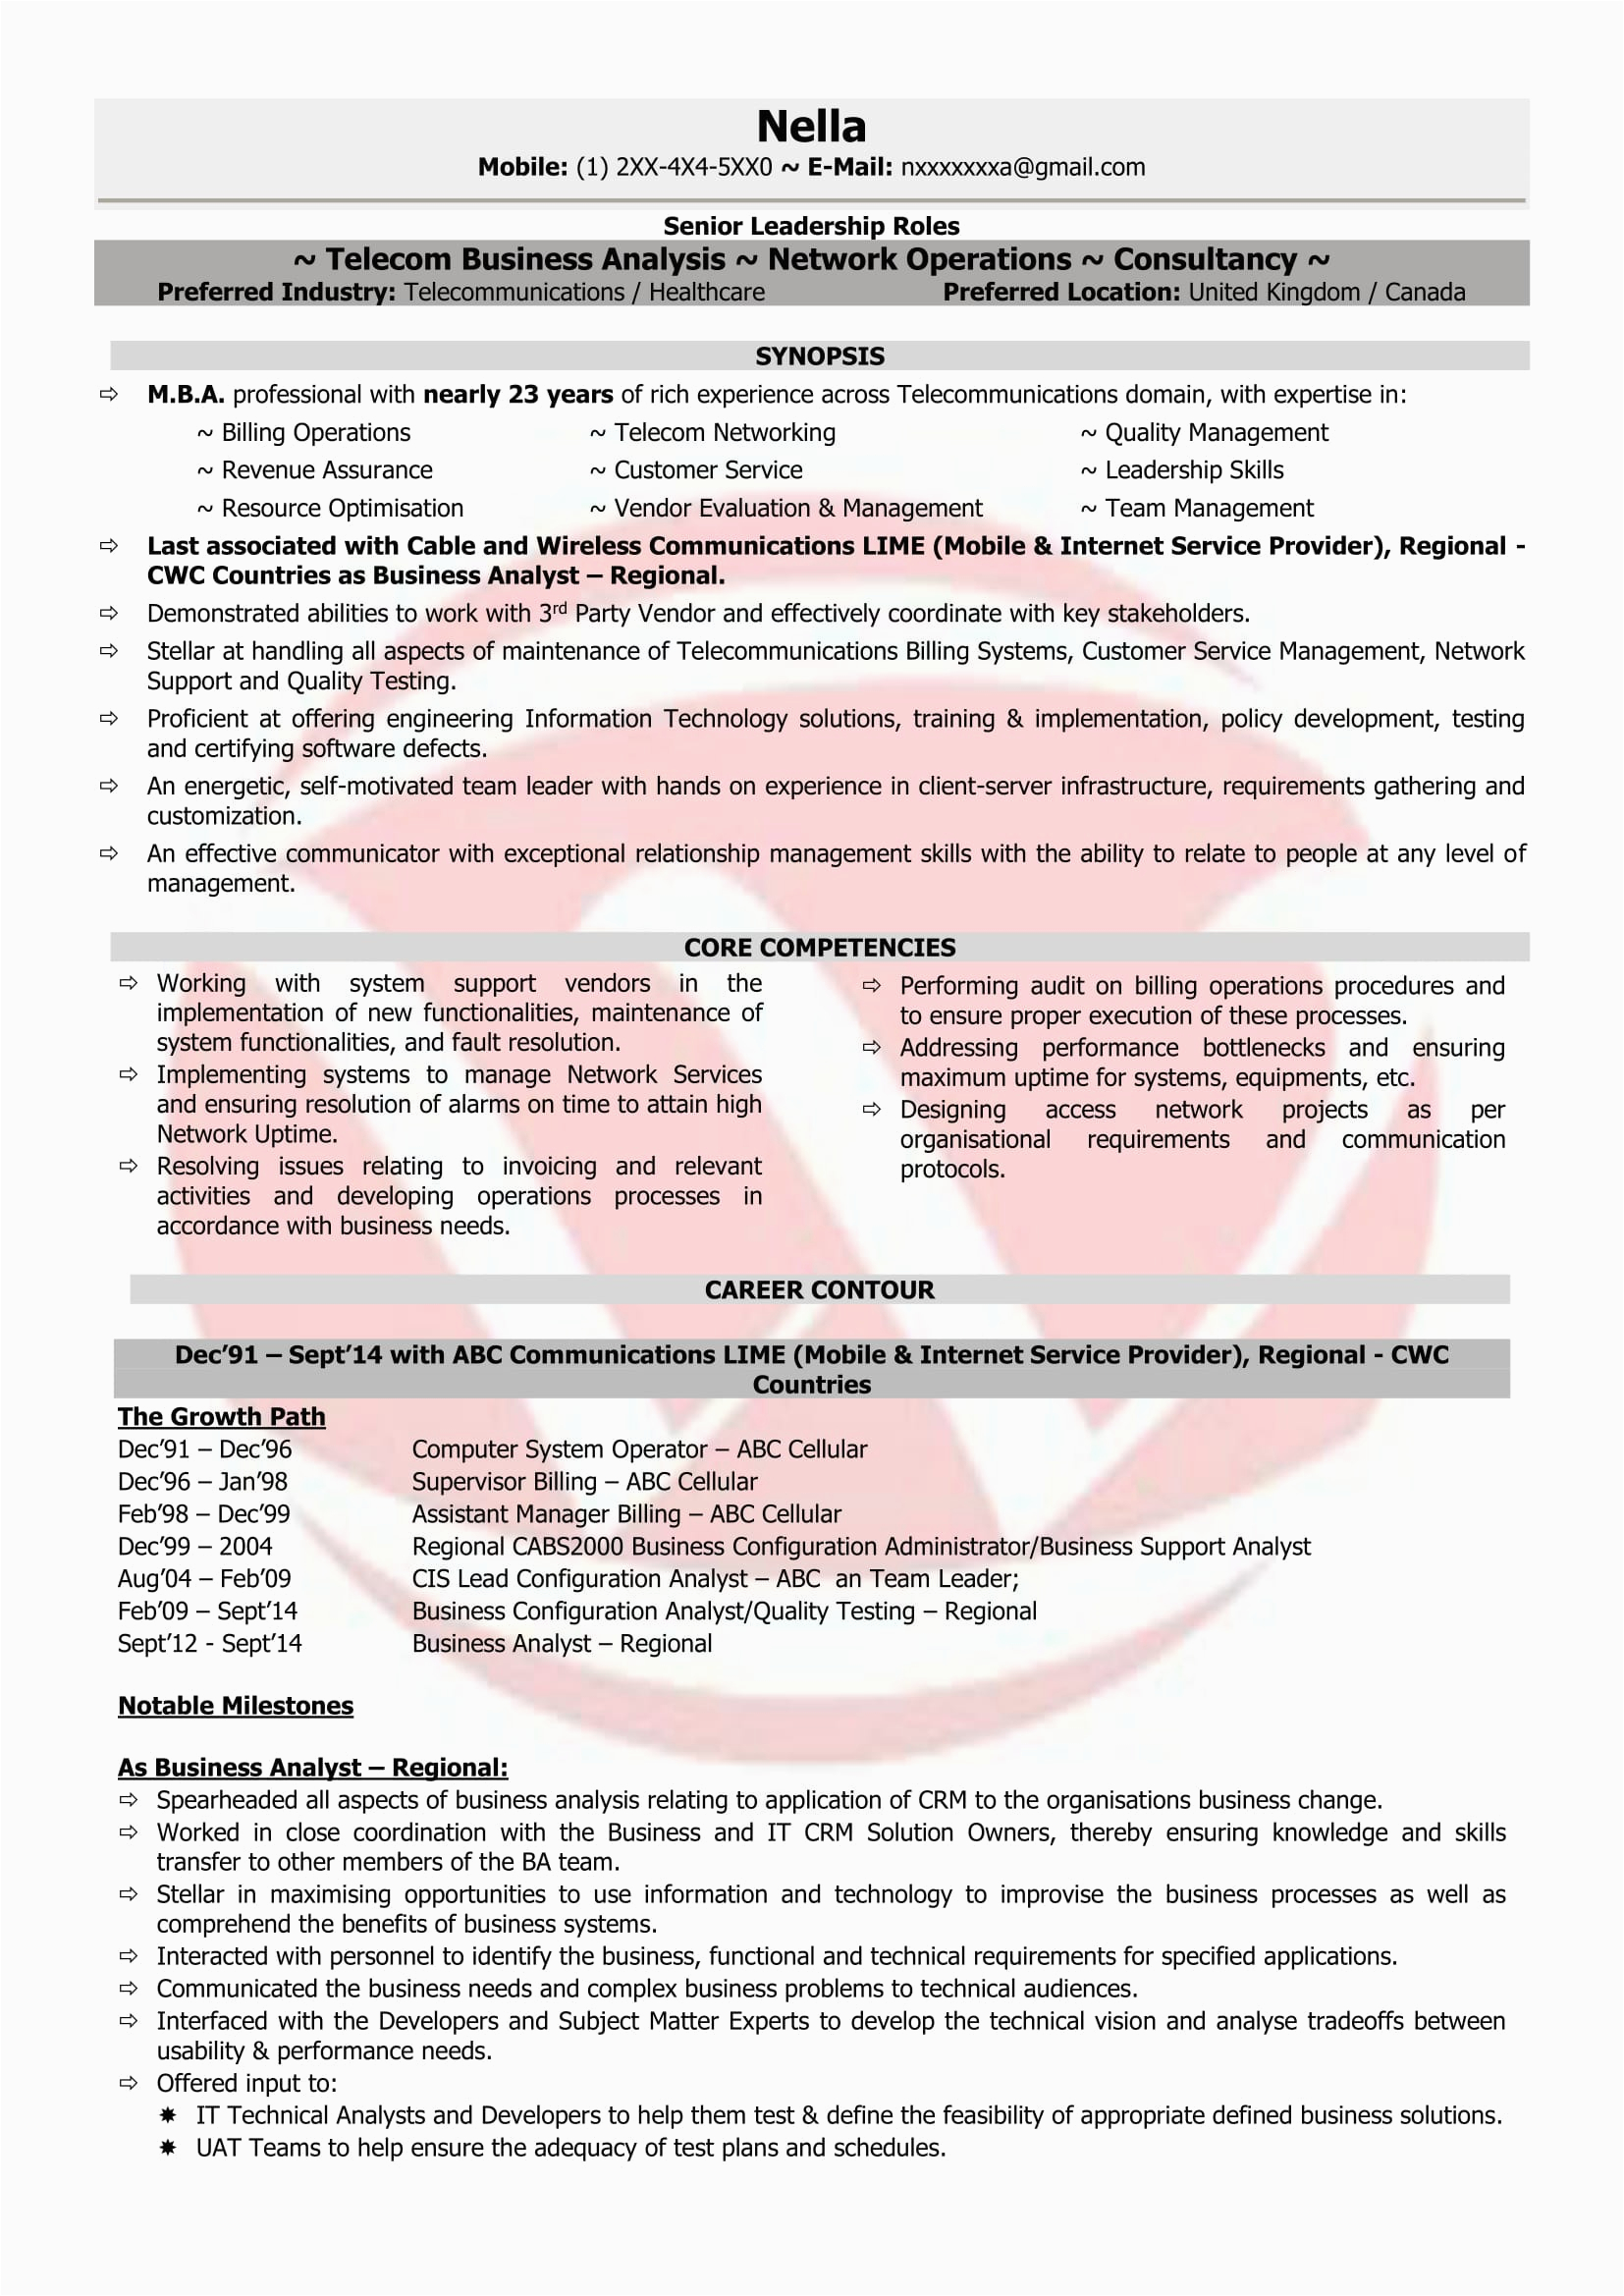 Telecom Project Manager Resume Sample India Tele Manager Sample Resumes Download Resume format Templates